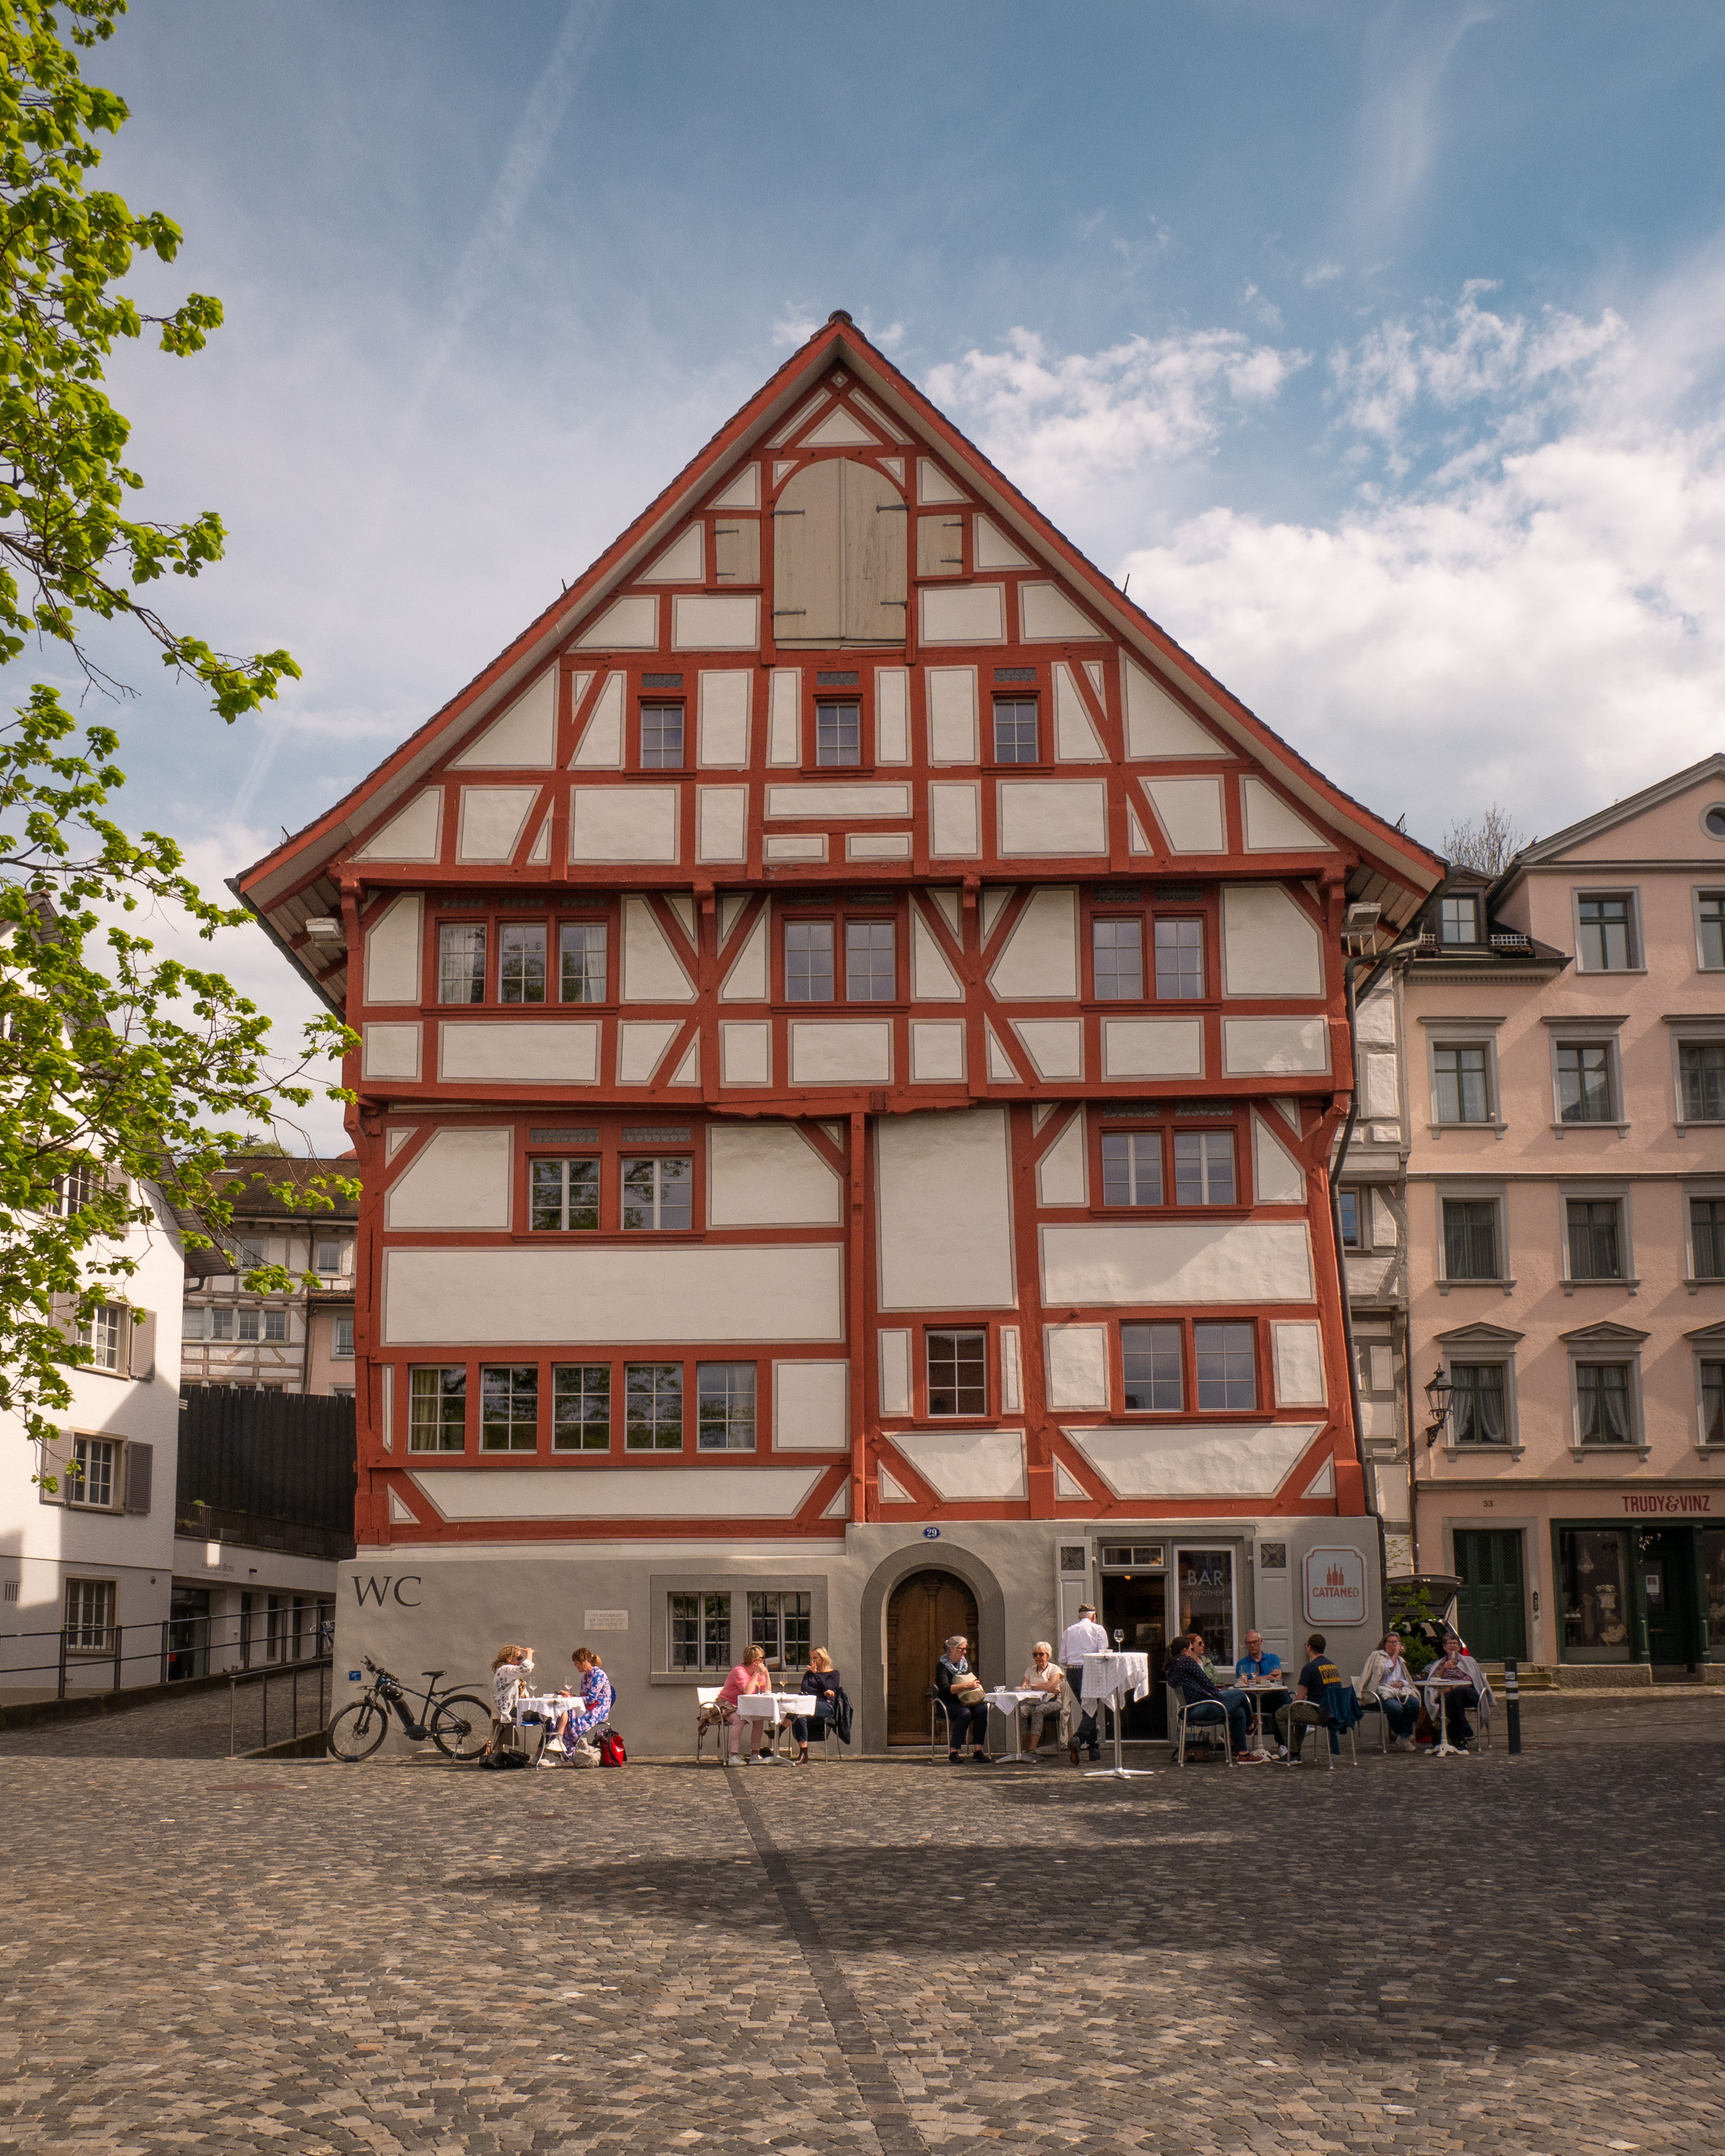 Red and white timber frame building in St. Gallen Old Town